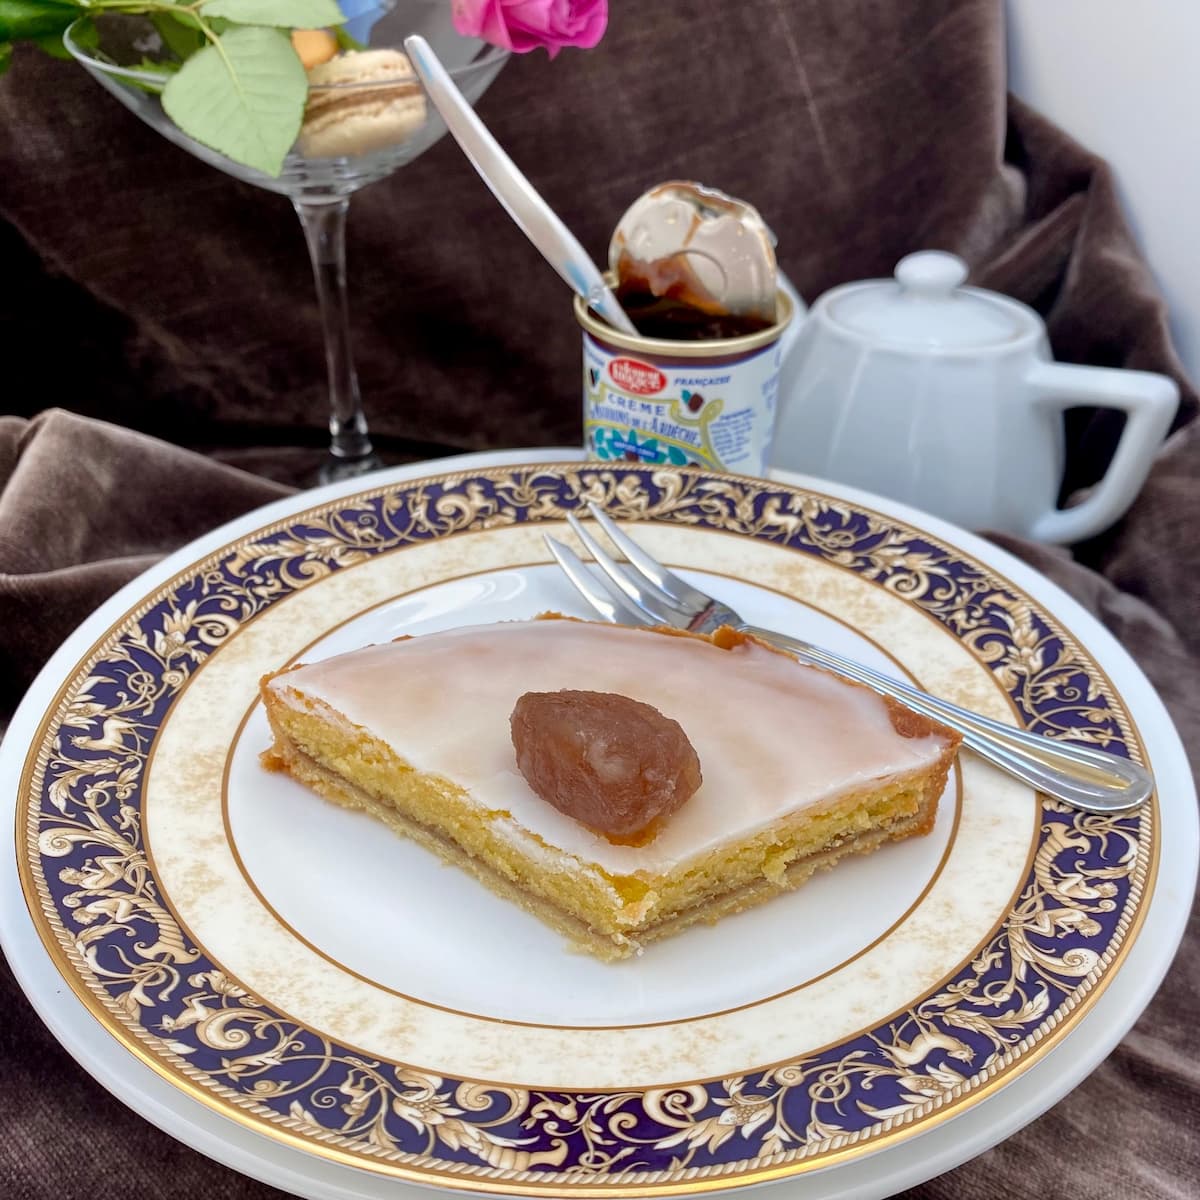 slice of almond chestnut tart with white glaze and topped with a candied chestnut